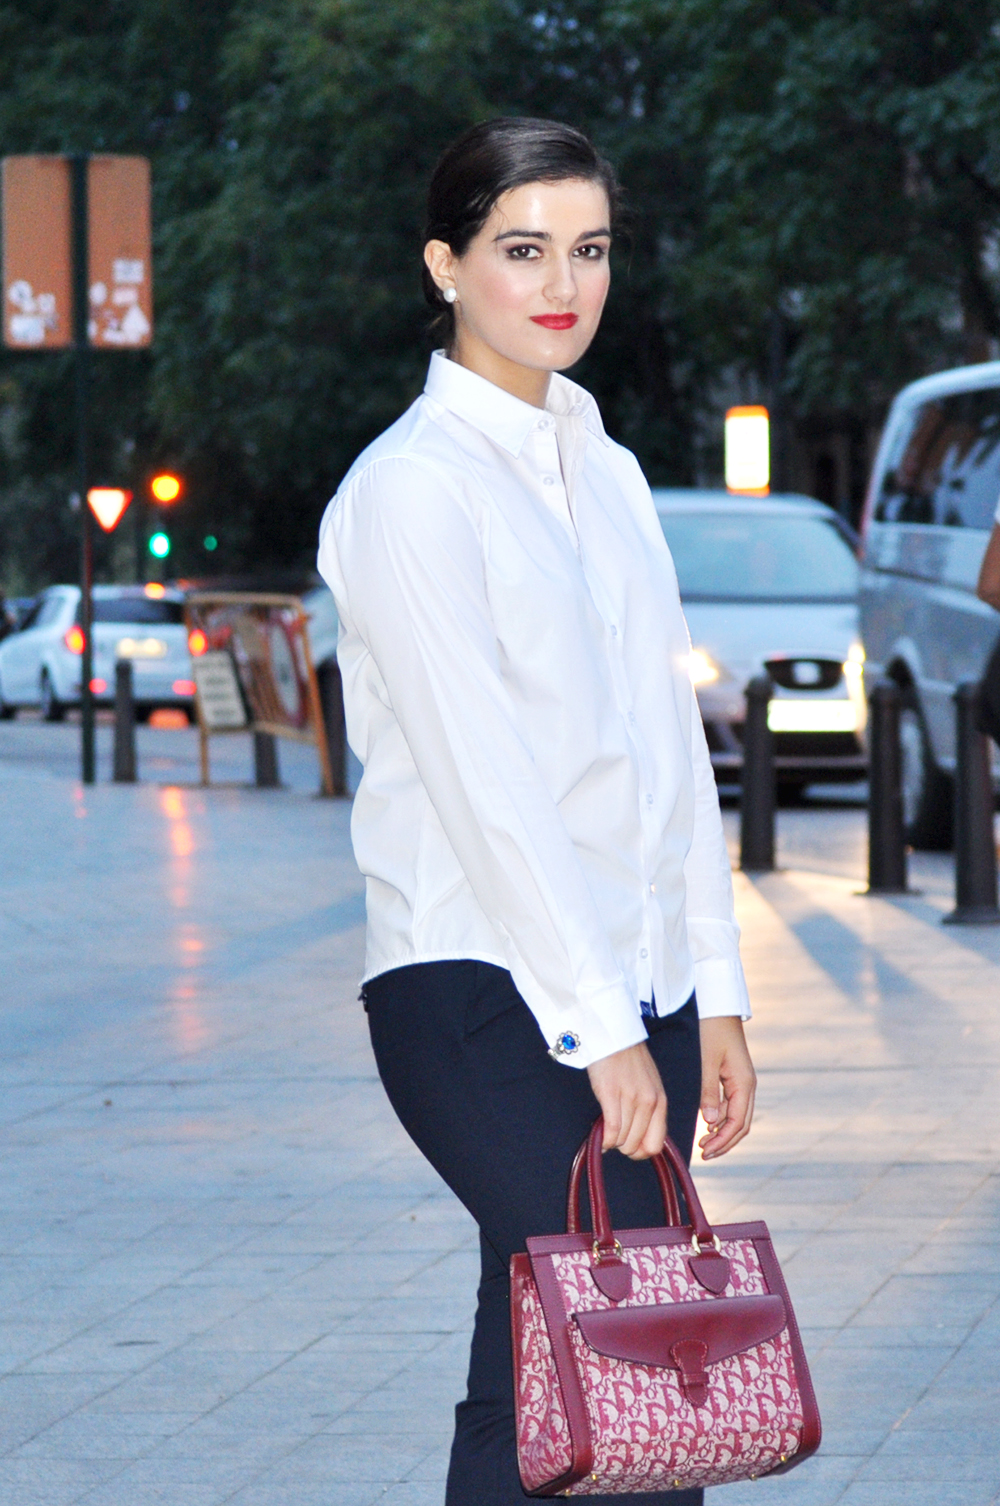 5 outfit ideas running late, fashion blogger advice, how wear jeans blazer flats, valencia spain blog something fashion